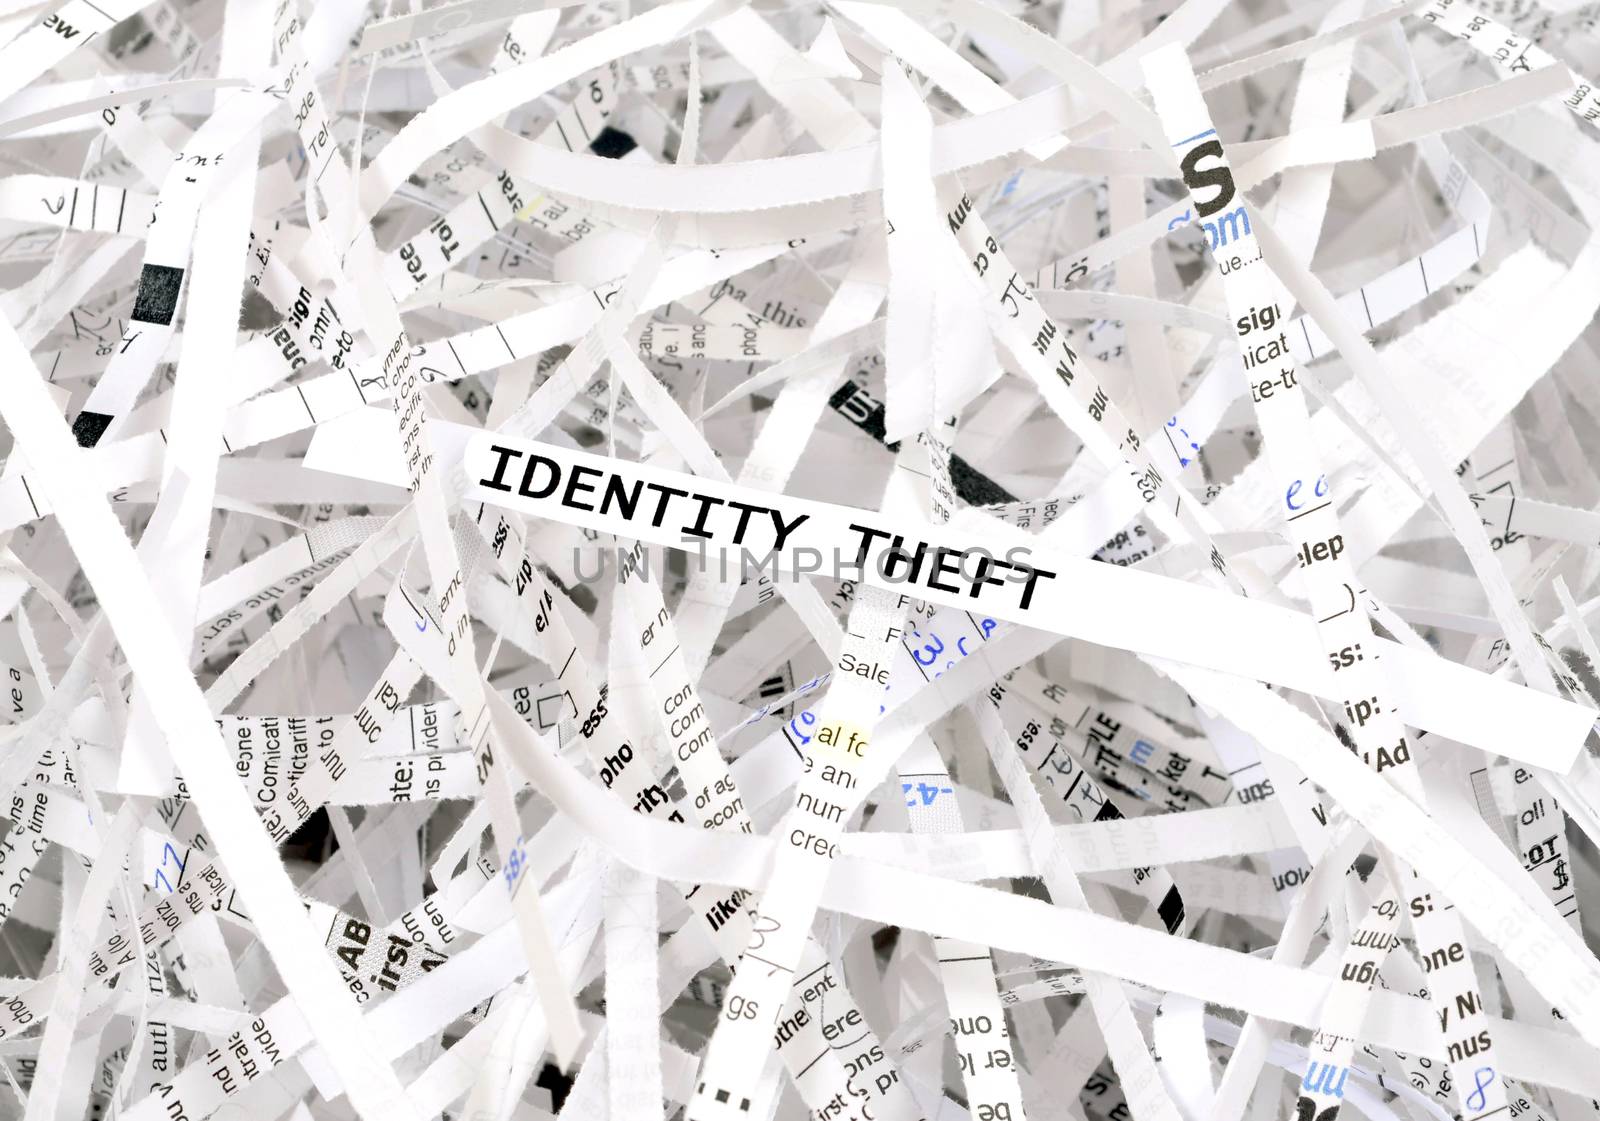 Identity theft text surrounded by shredded paper. Great concept for information protection